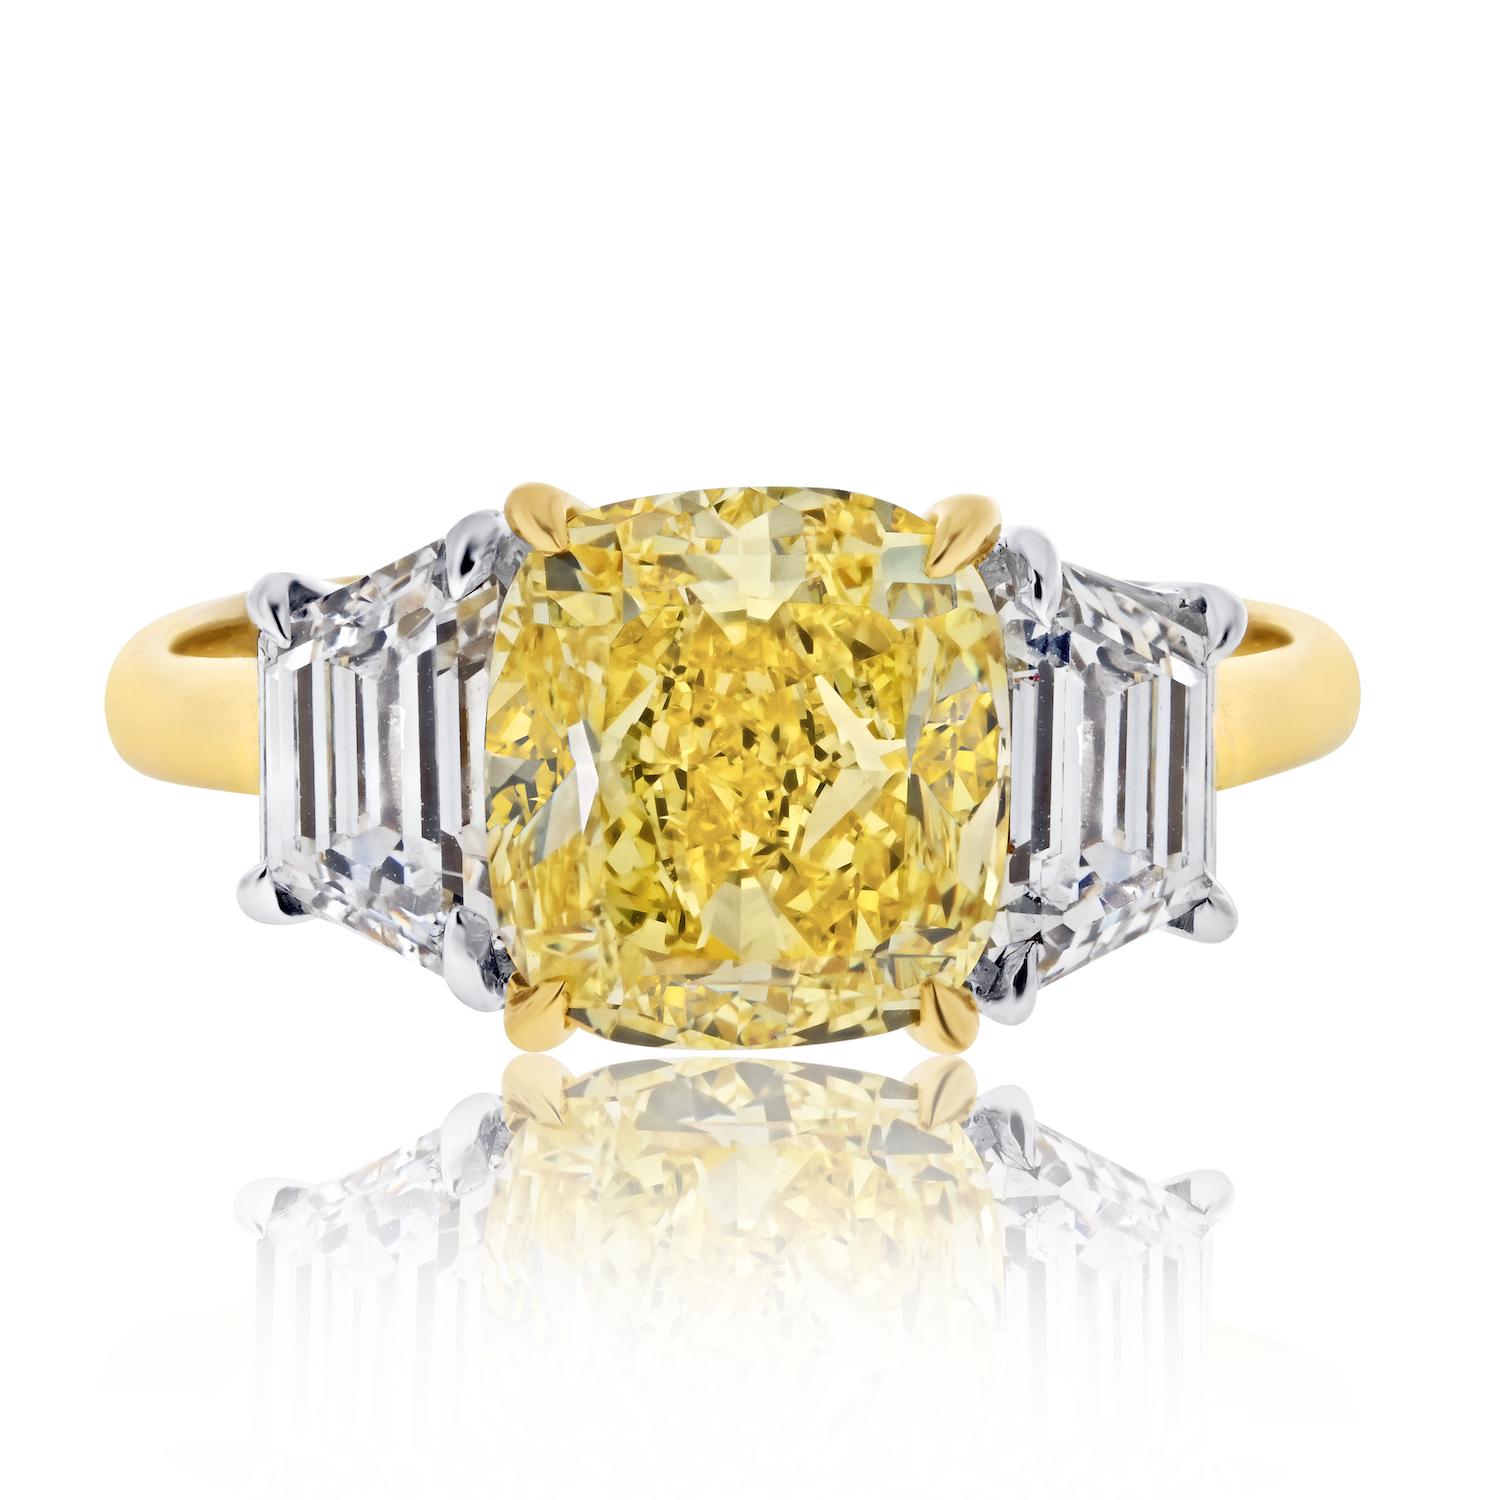 Elevate your love story with opulence and grace through this extraordinary 3.03ct Fancy Vivid Yellow Cushion Cut Three Stone Diamond Engagement Ring. 

At its heart is a captivating 3.03-carat Fancy Vivid Yellow diamond, accompanied by a GIA